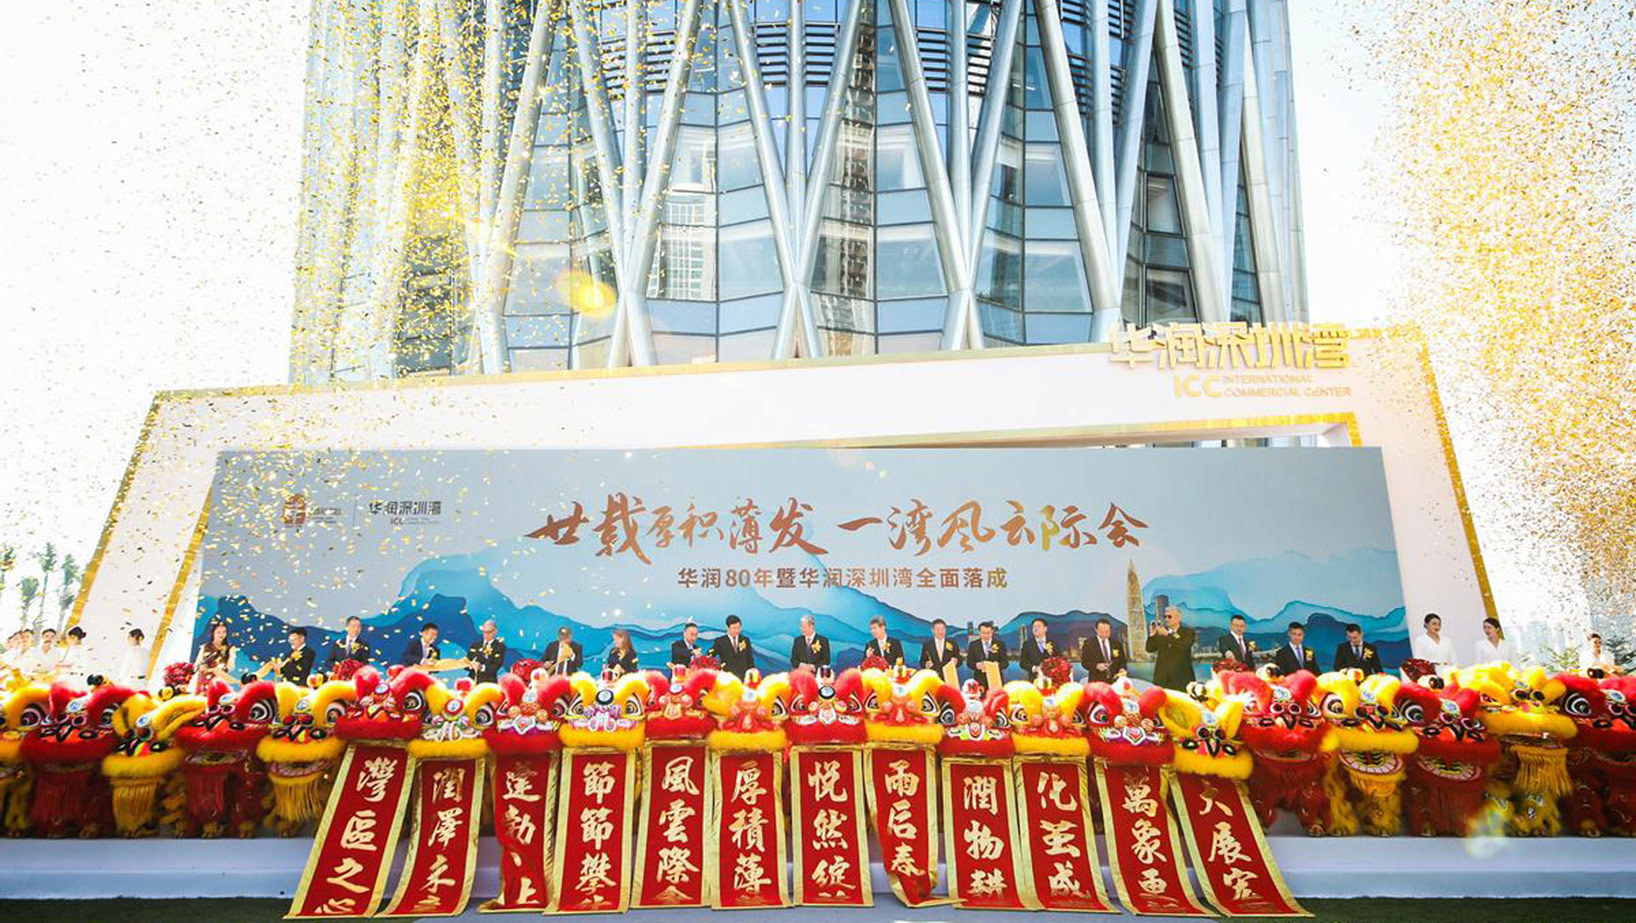 Twenty Years of Accumulation • One Bay Adventure | China Resources' 80th Anniversary and the Comprehensive Completion Ceremony of China Resources Shenzhen Bay